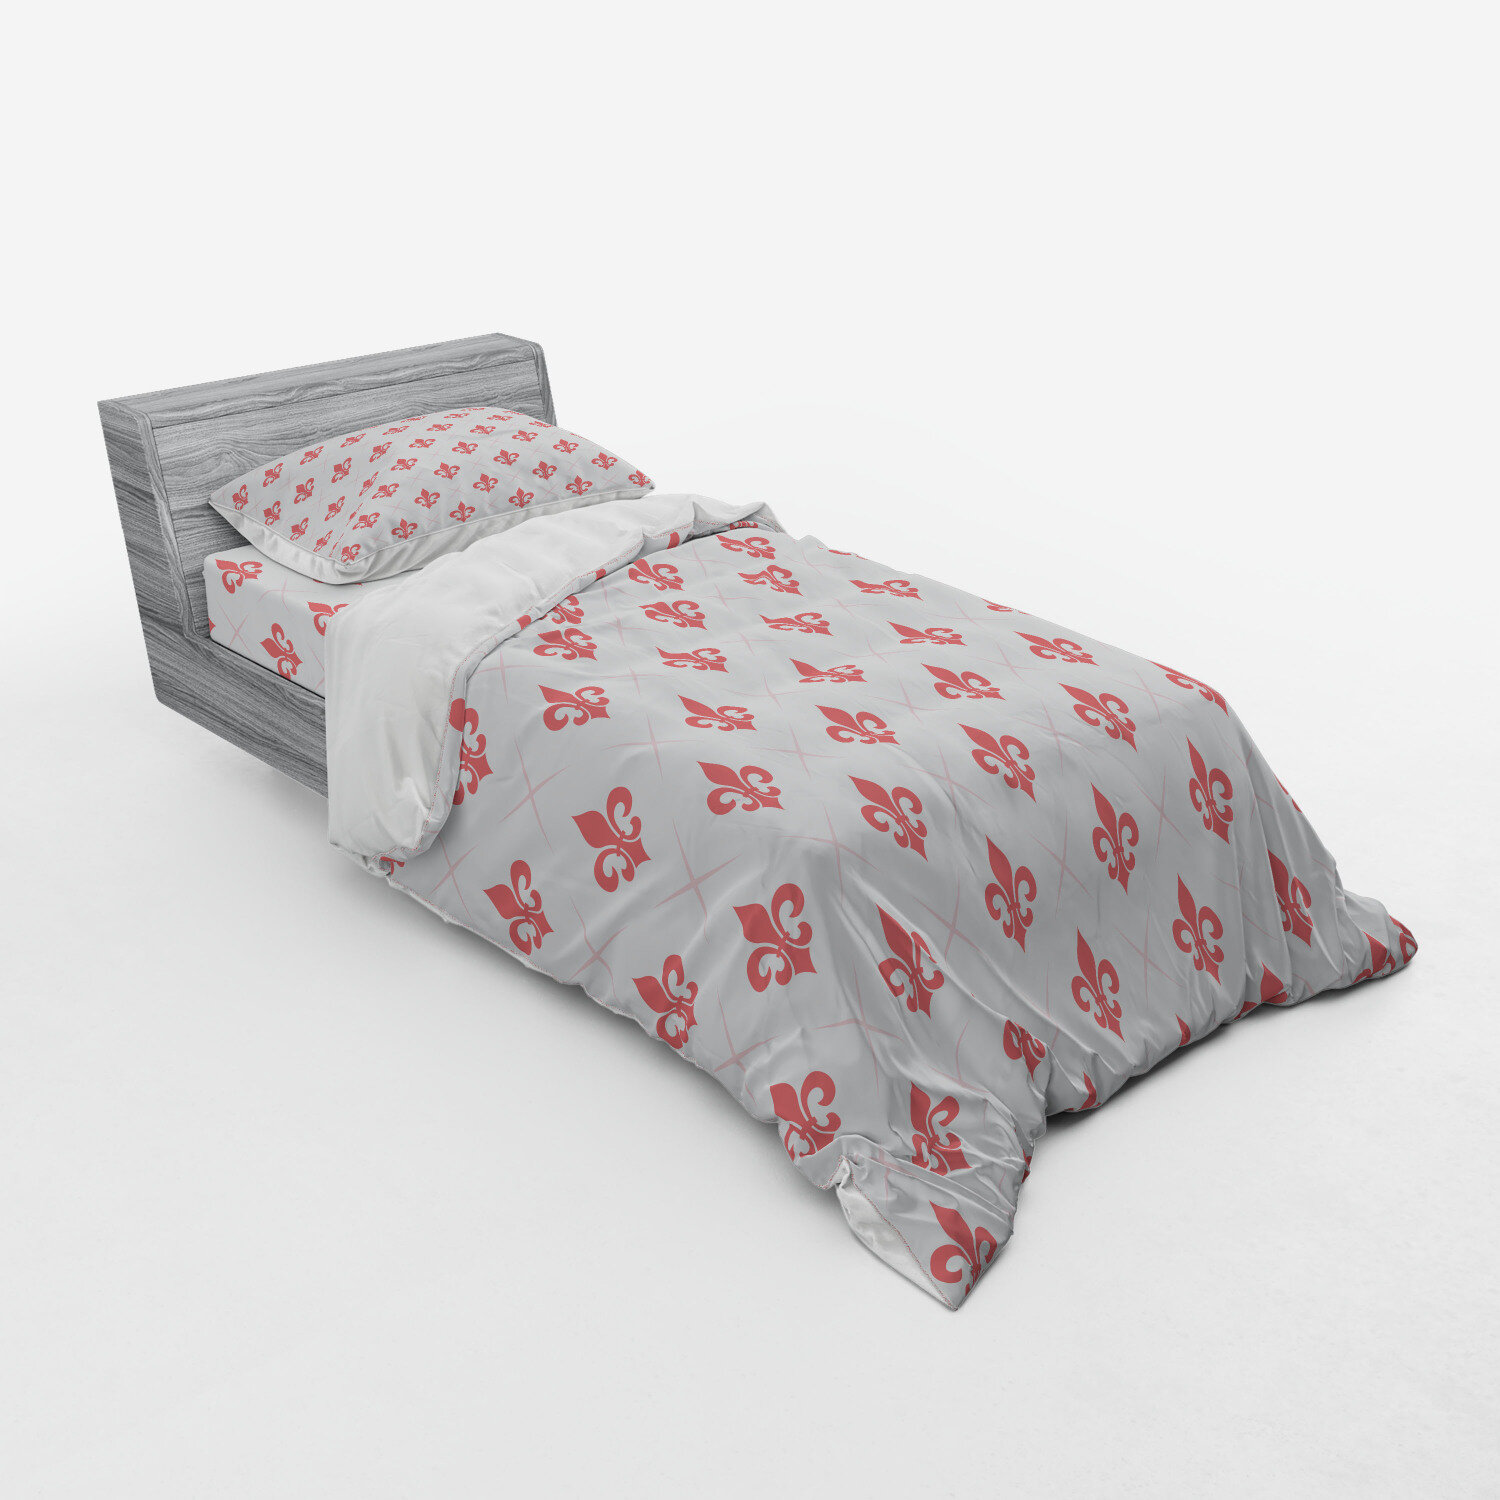 East Urban Home Coral Checkered With Of Fleur De Lis Royal French